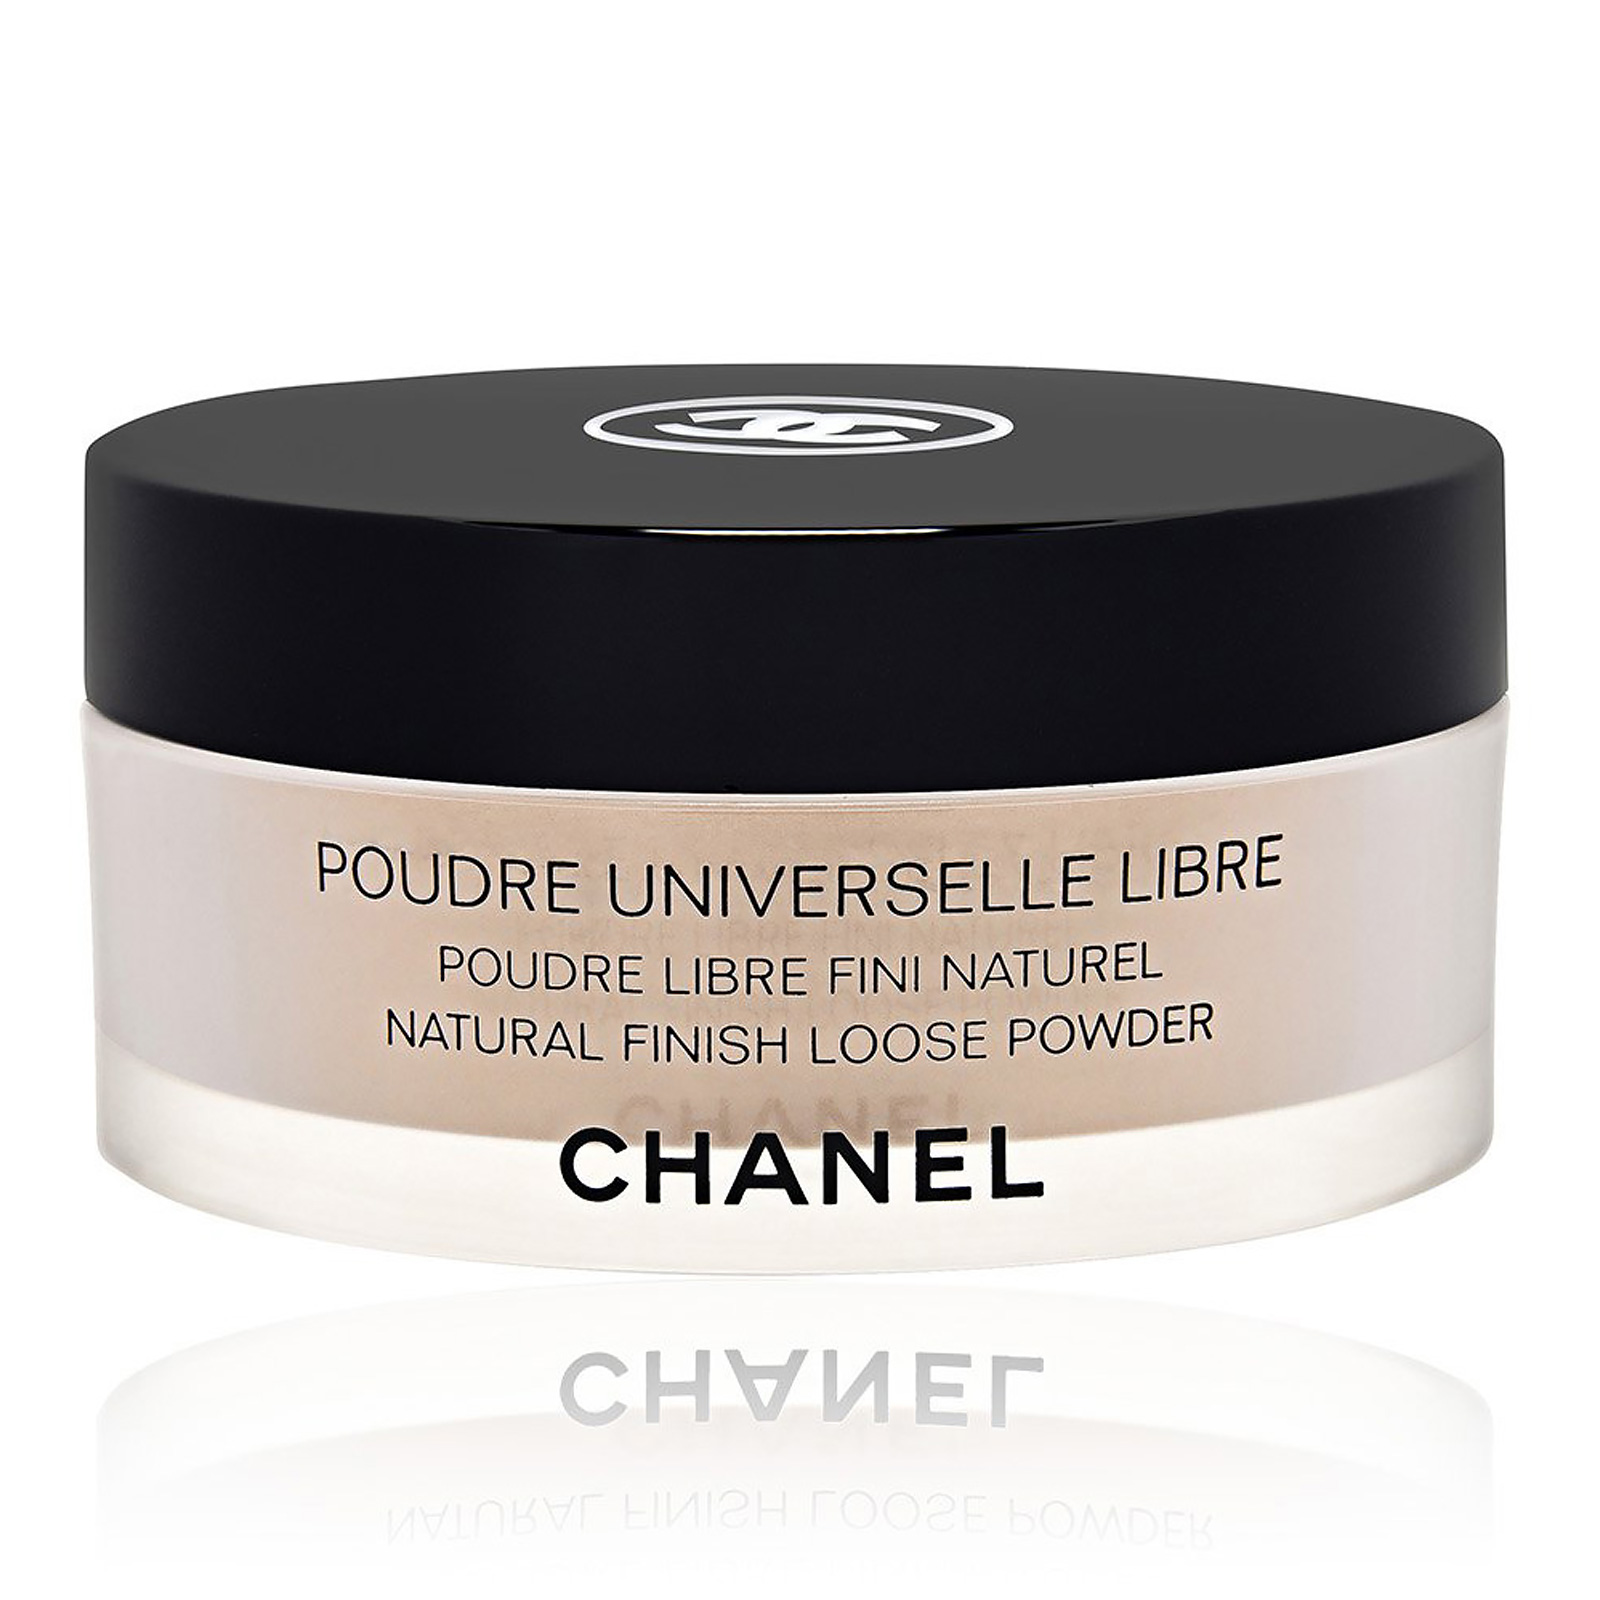 Chanel Poudre Universelle Libre Natural Finish Loose Powder30 g 1